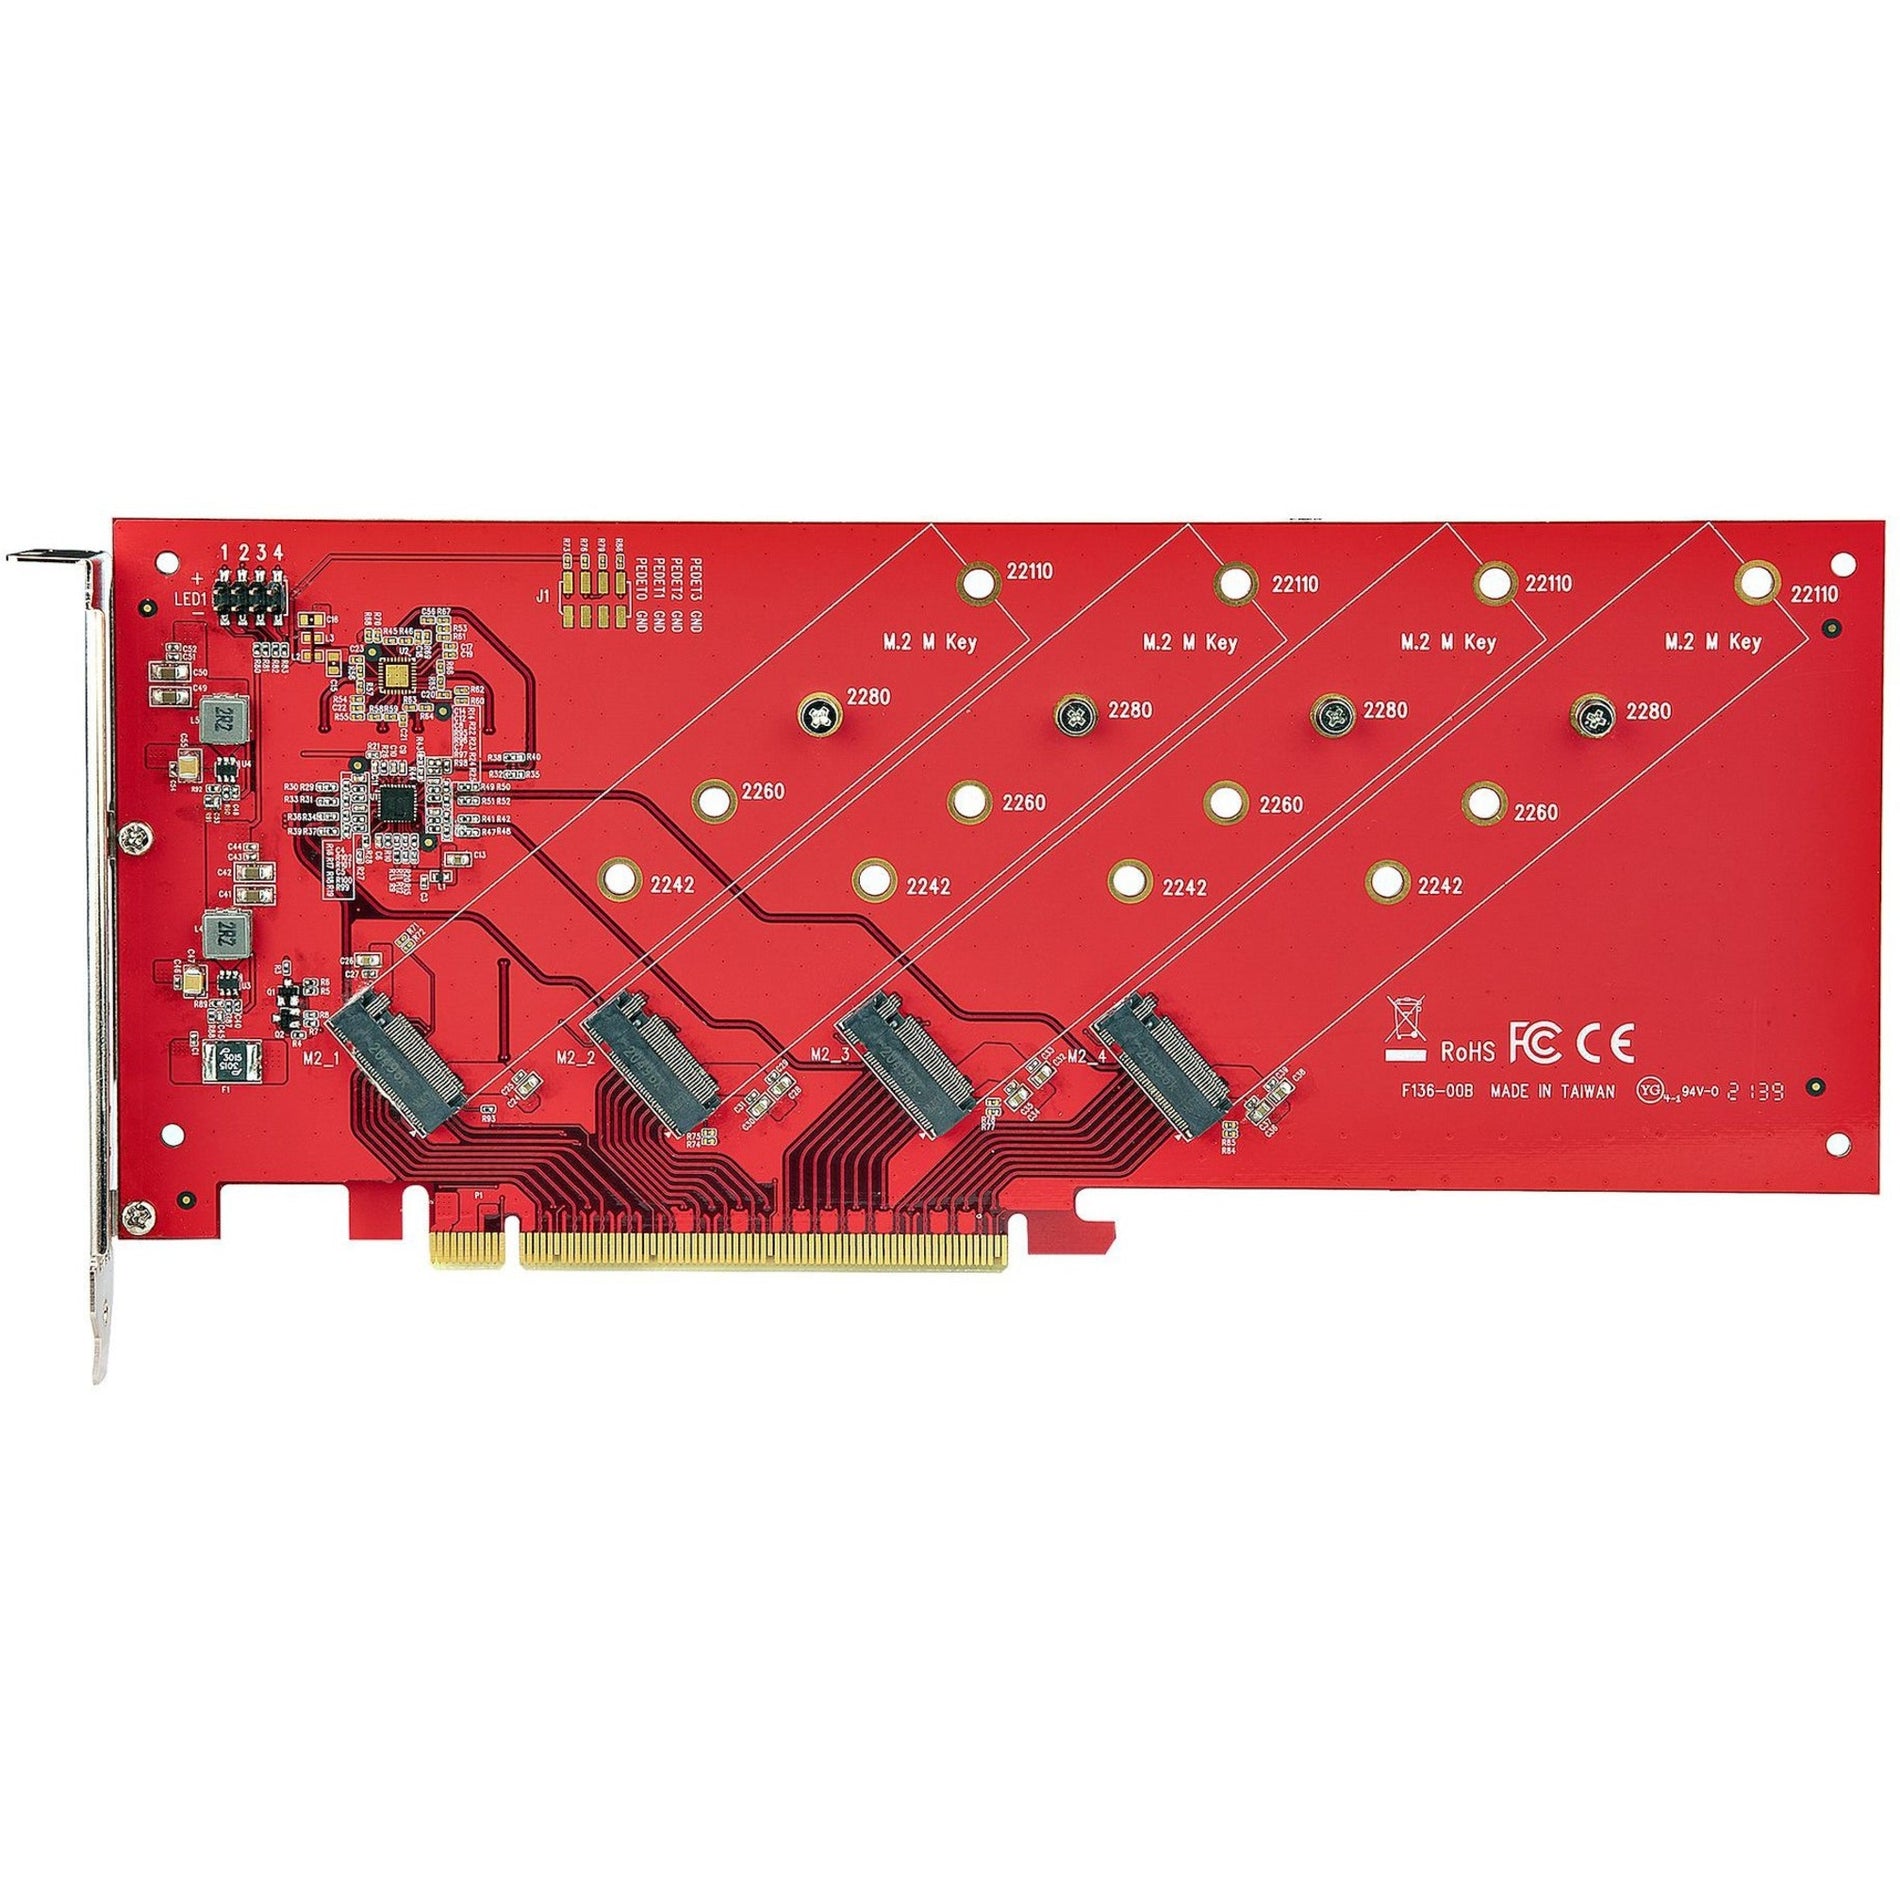 StarTech.com QUAD-M2-PCIE-CARD-B Quad M.2 PCIe Adapter Card, x16 Quad NVMe or AHCI M.2 SSD to PCI Express 4.0, Up to 7.8GBps/Drive